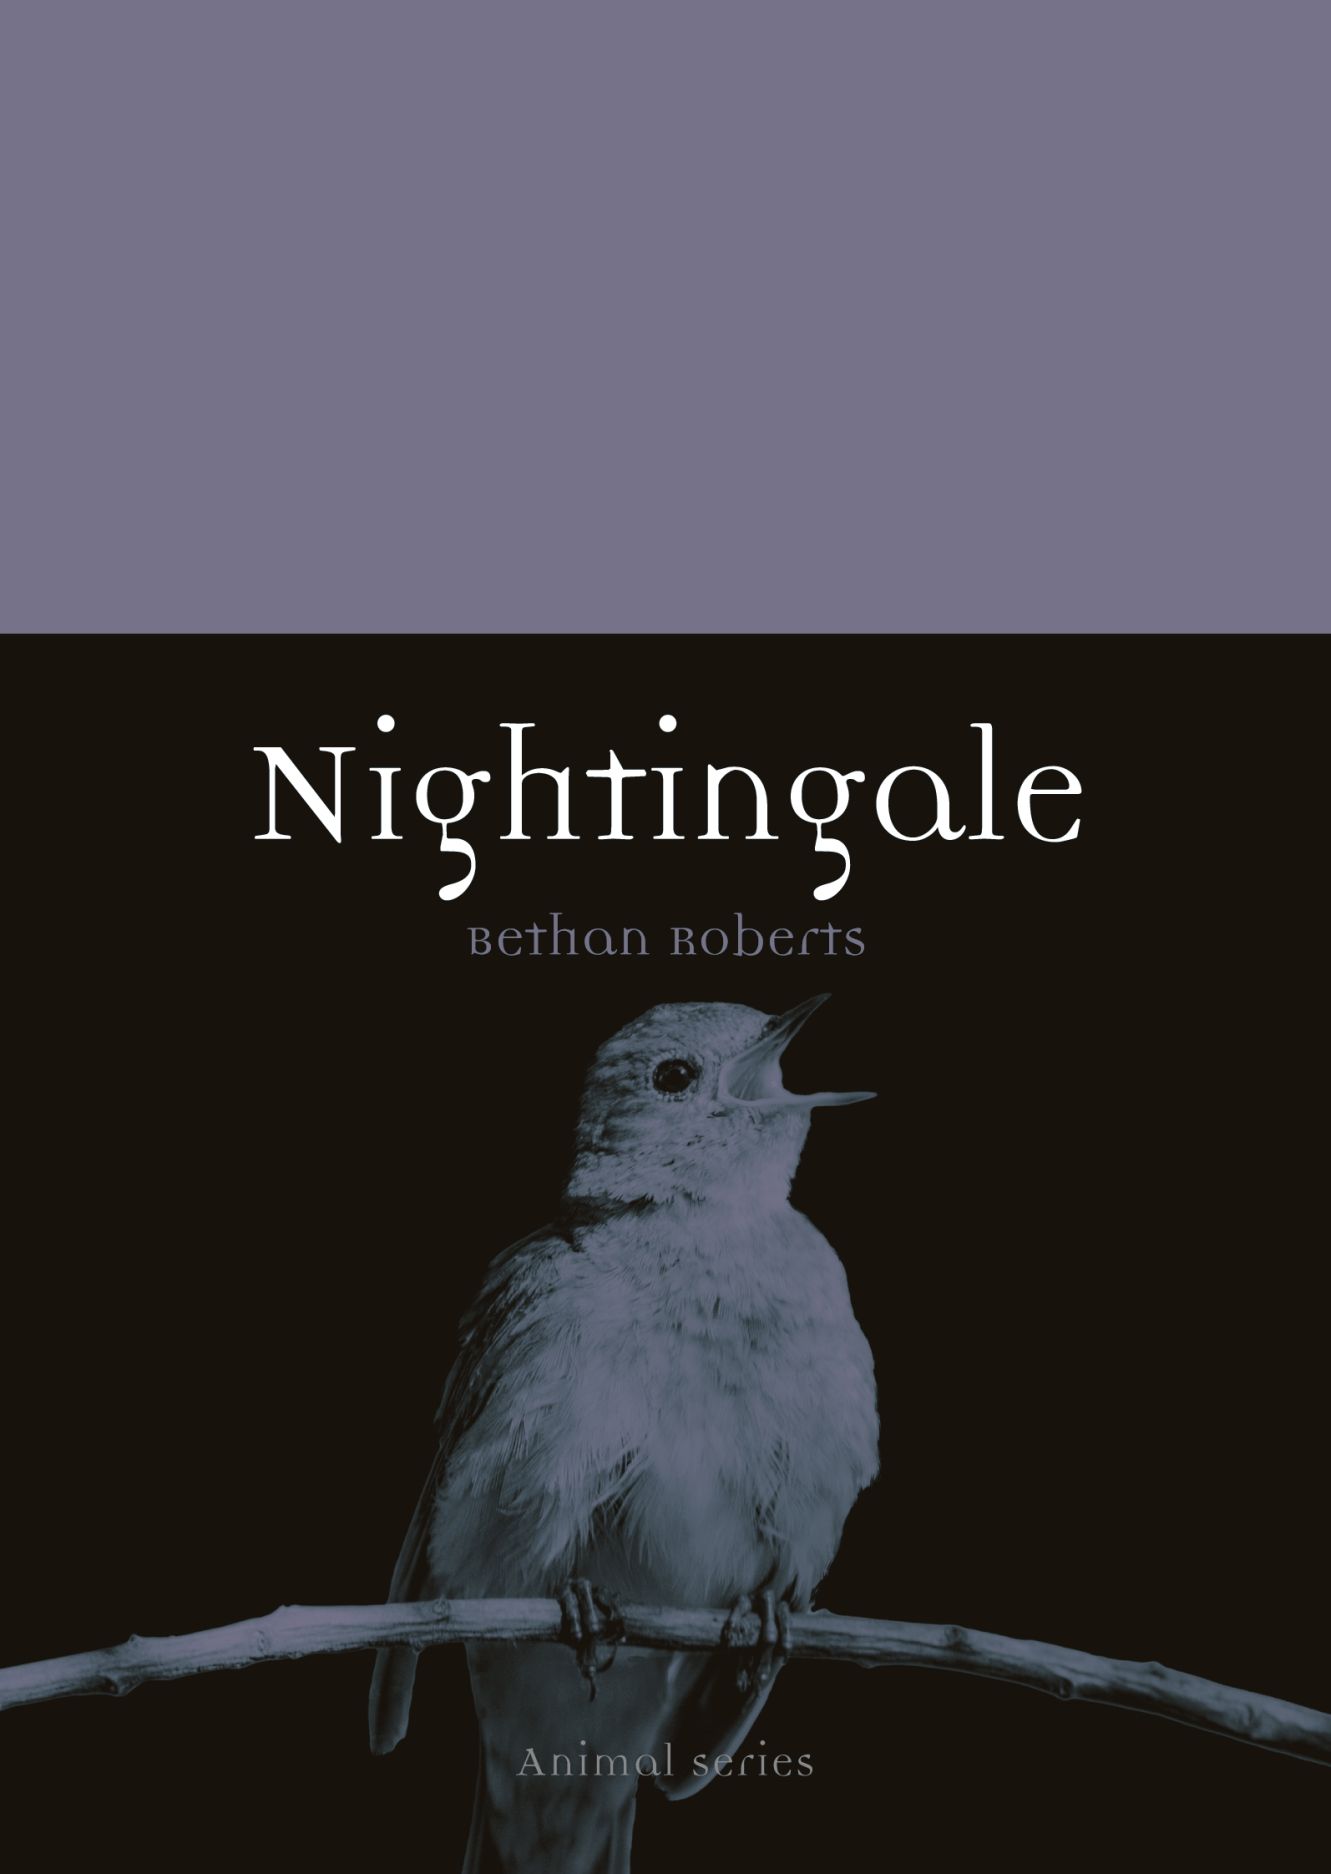 Call The Nightingale Again. - Call The Nightingale Again. Poem by